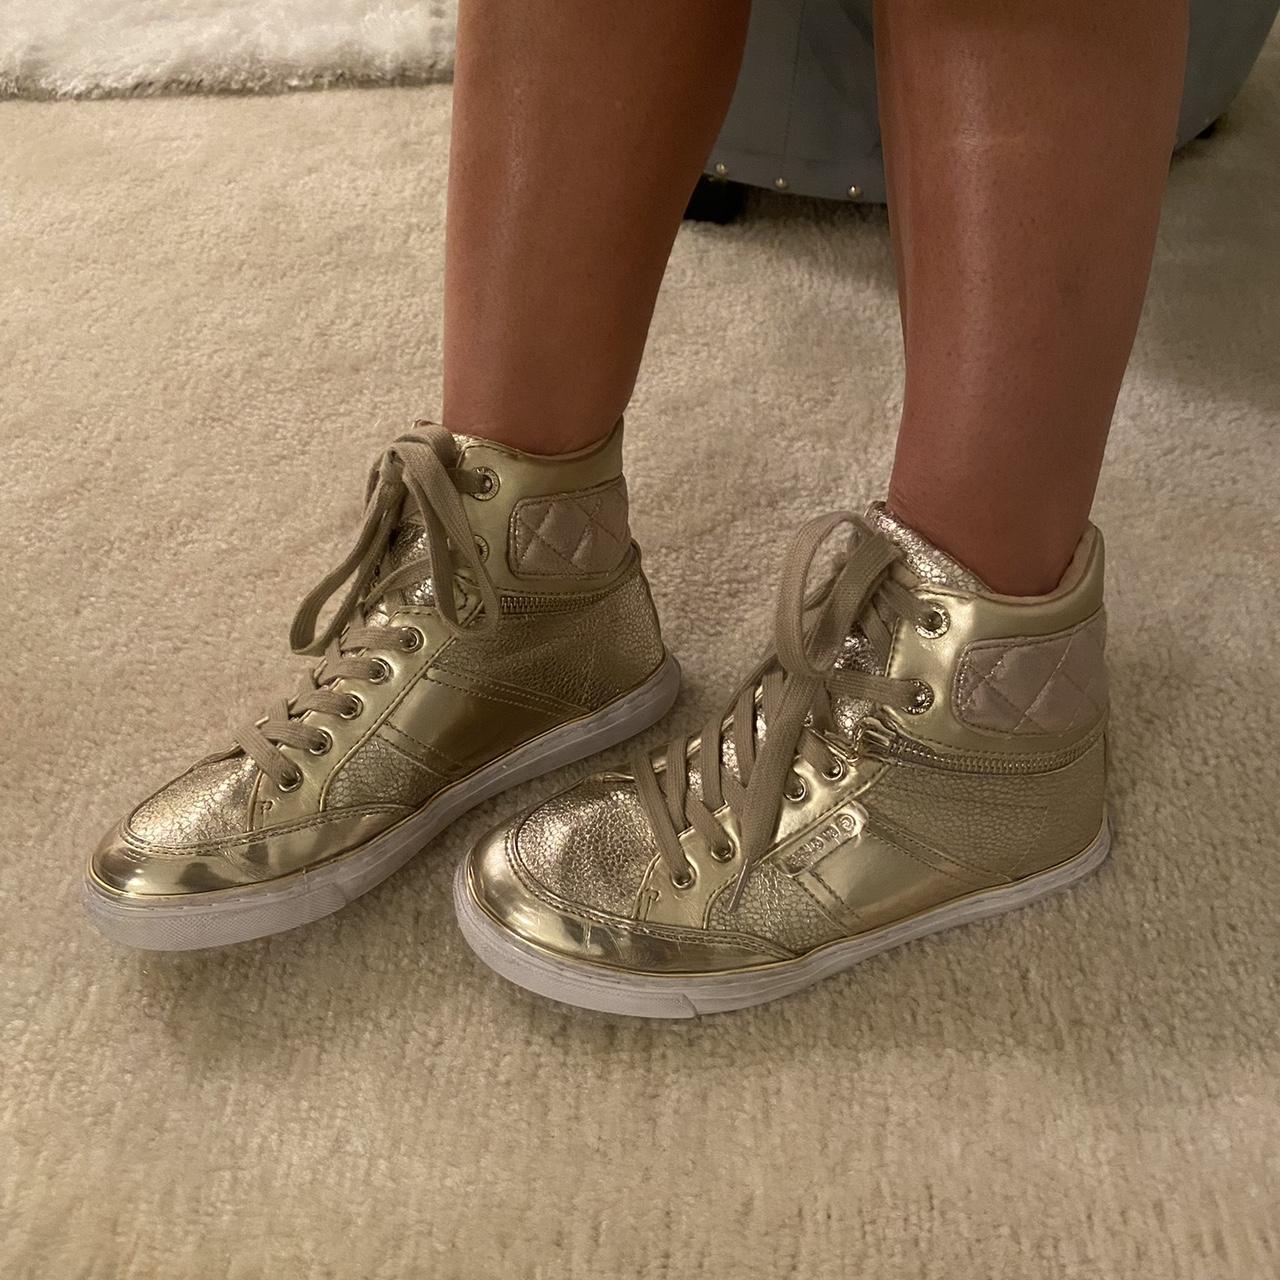 Fashion G by Guess high top sneakers, faux leather,... - Depop